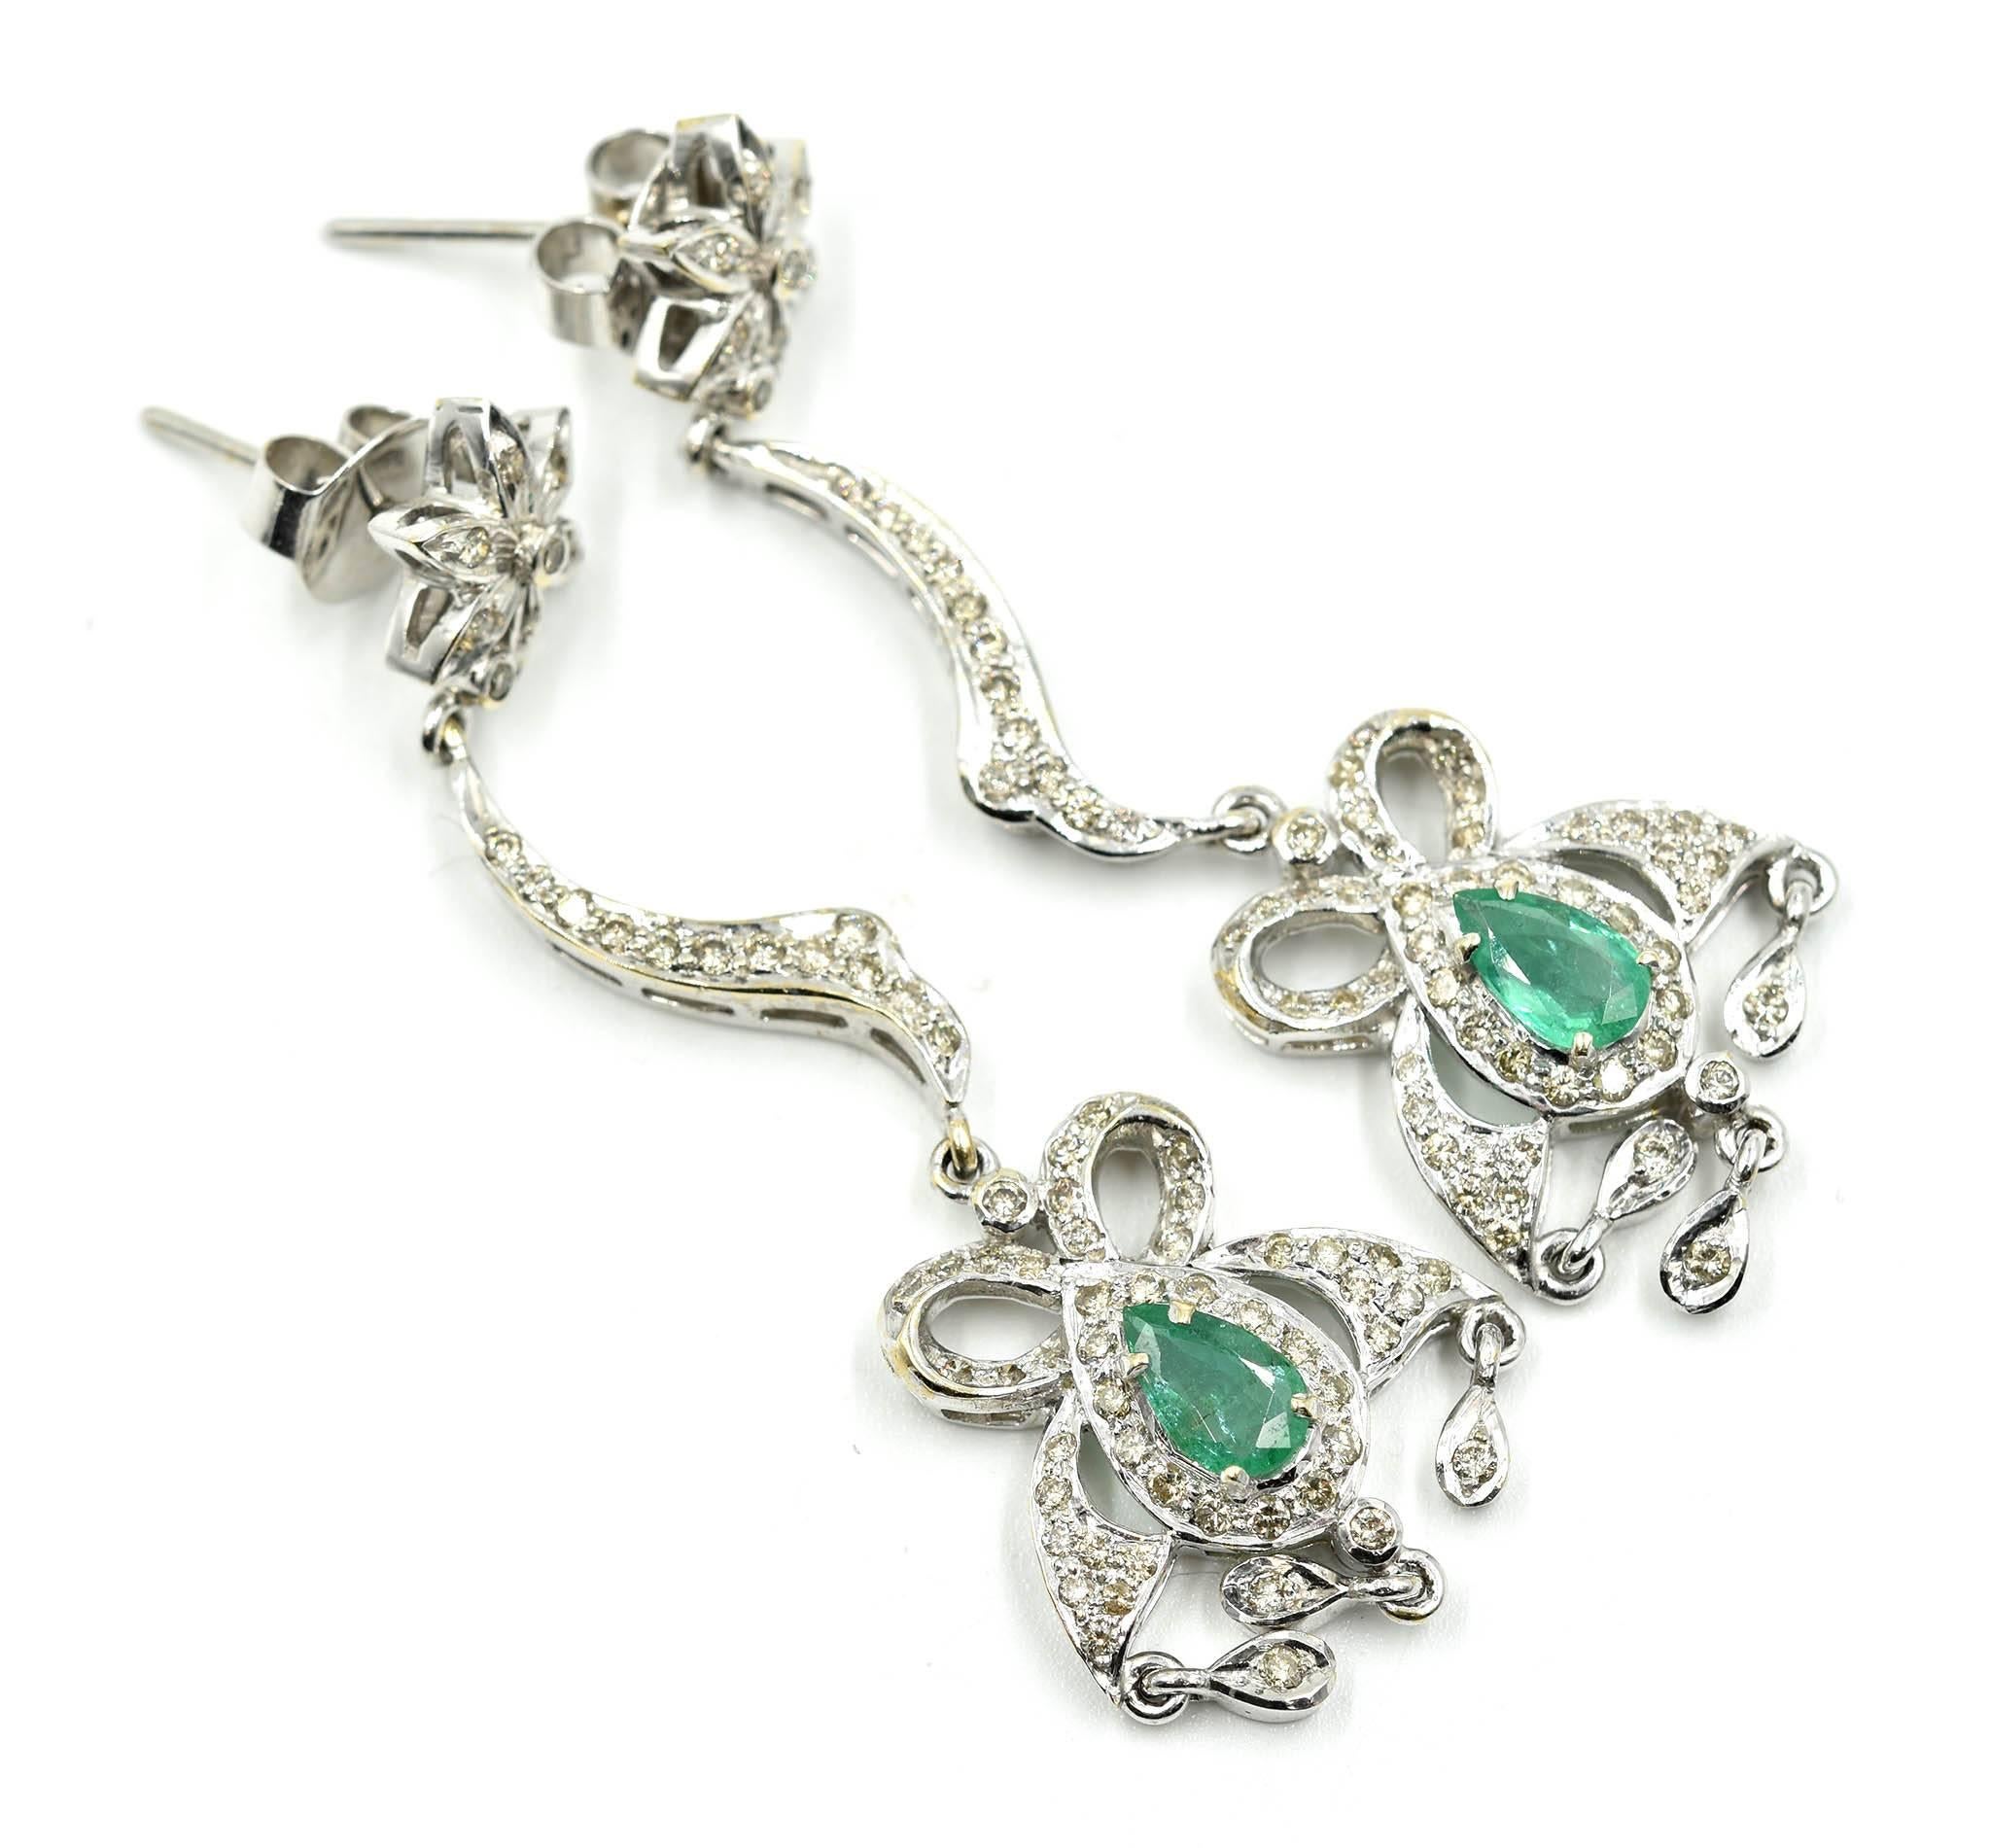 Designer: custom design
Material: 18k white gold
Diamonds: 1.60 carat total weight
Emeralds: two pear cut emeralds = 0.80 carat total weight
Dimensions: earrings dangle 2 ¼ inches x ¾ inches wide
Fastenings: friction backs
Weight: 16.80 grams
